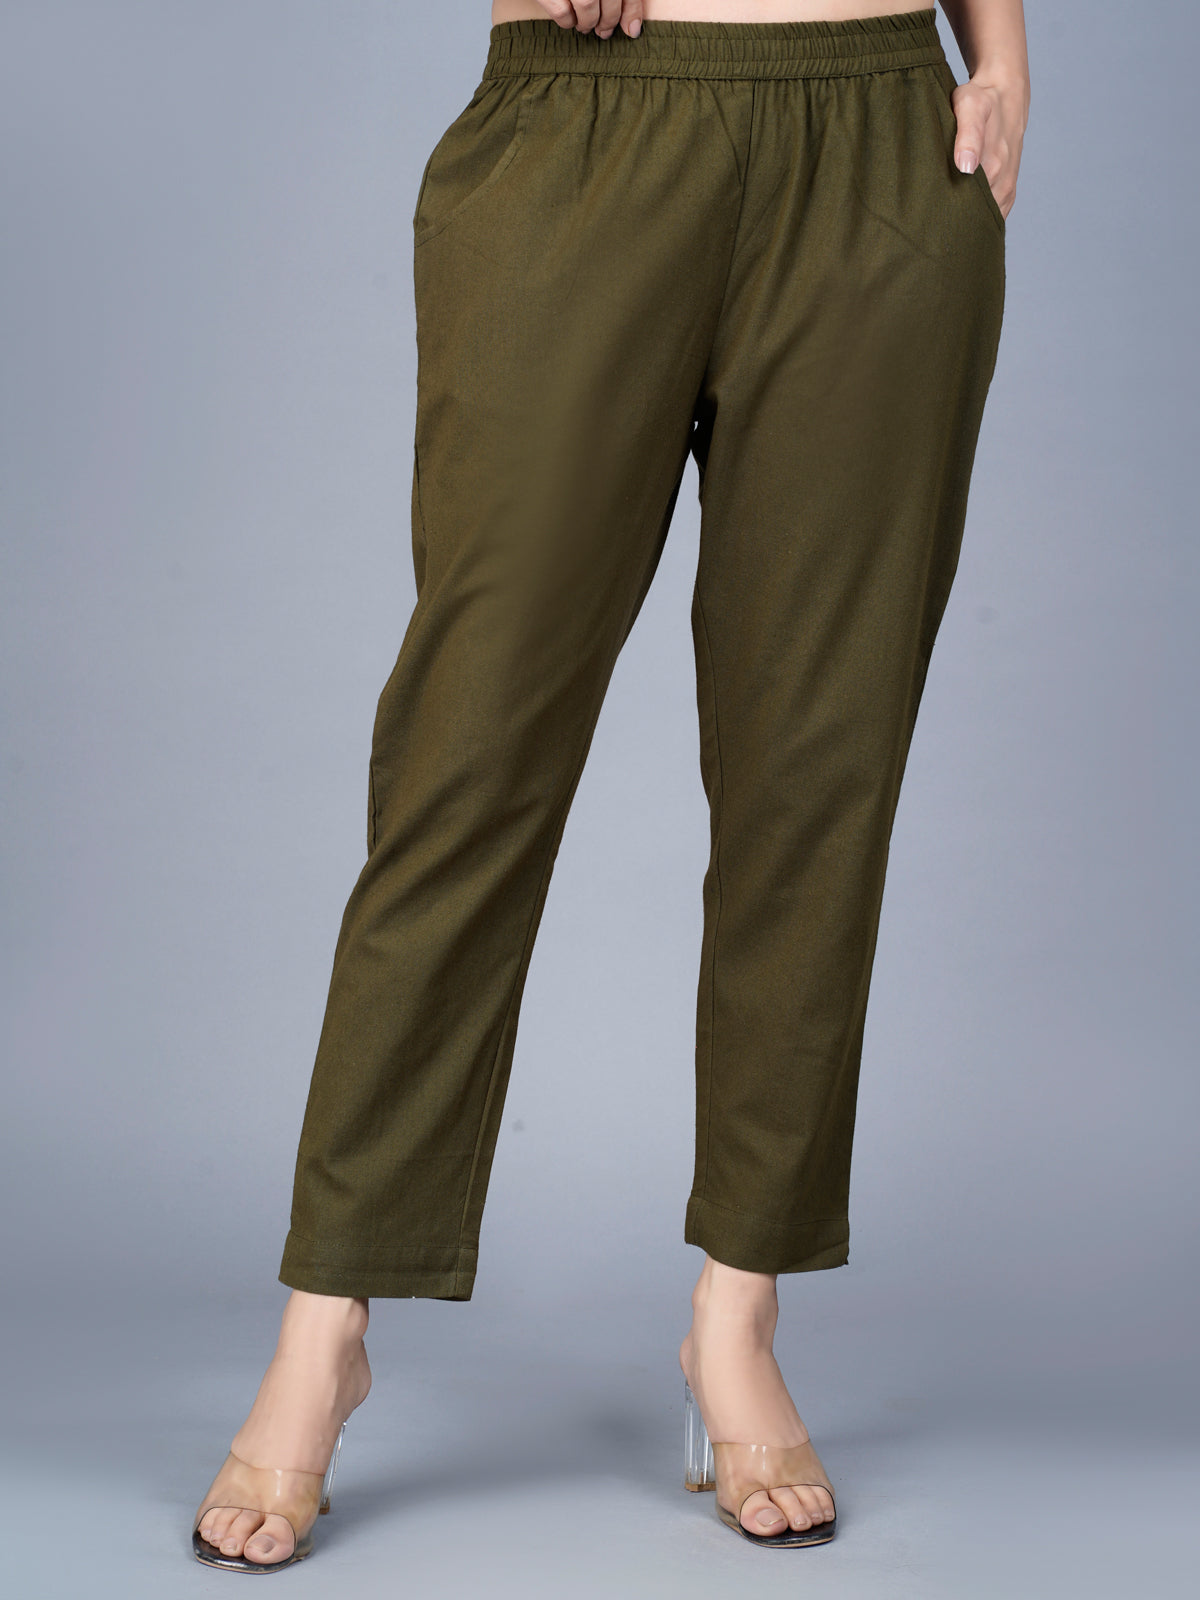 Pack Of 2 Womens Regular Fit Brown And Dark Green Fully Elastic Waistband Cotton Trouser